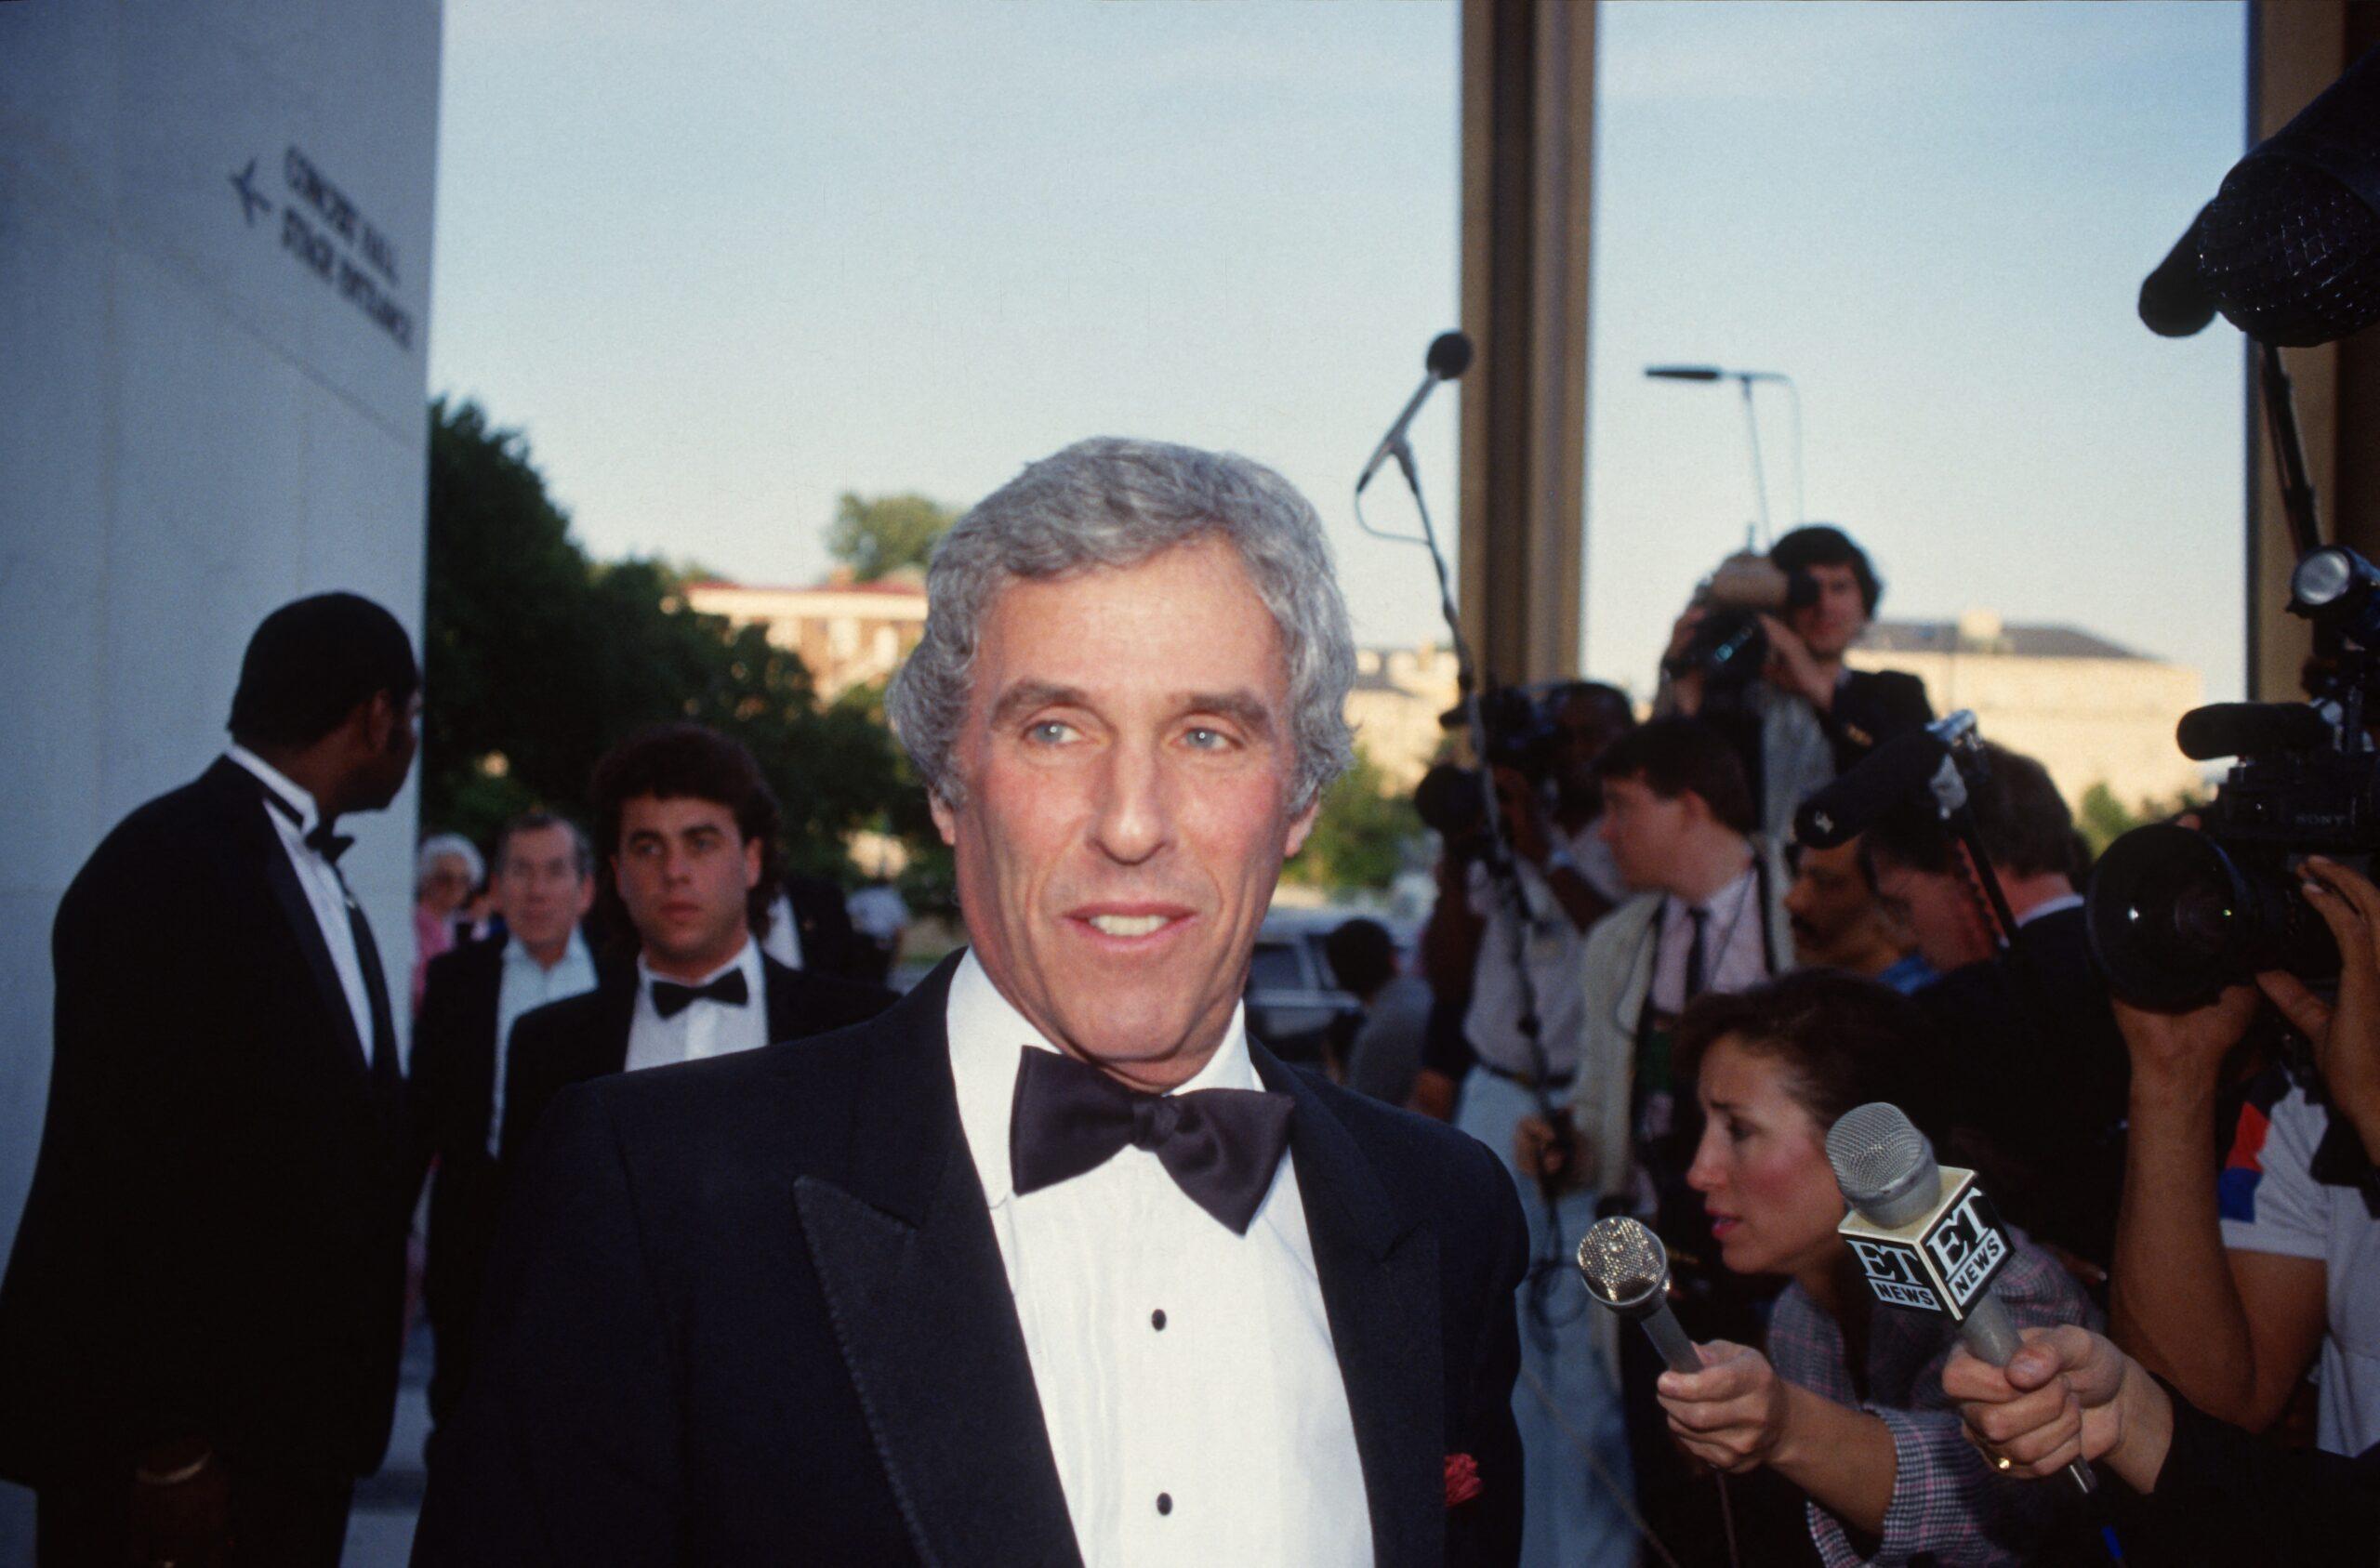 Burt Bacharach at a Gala for AIDS Sponsored by Dionne Warwick and Showtime